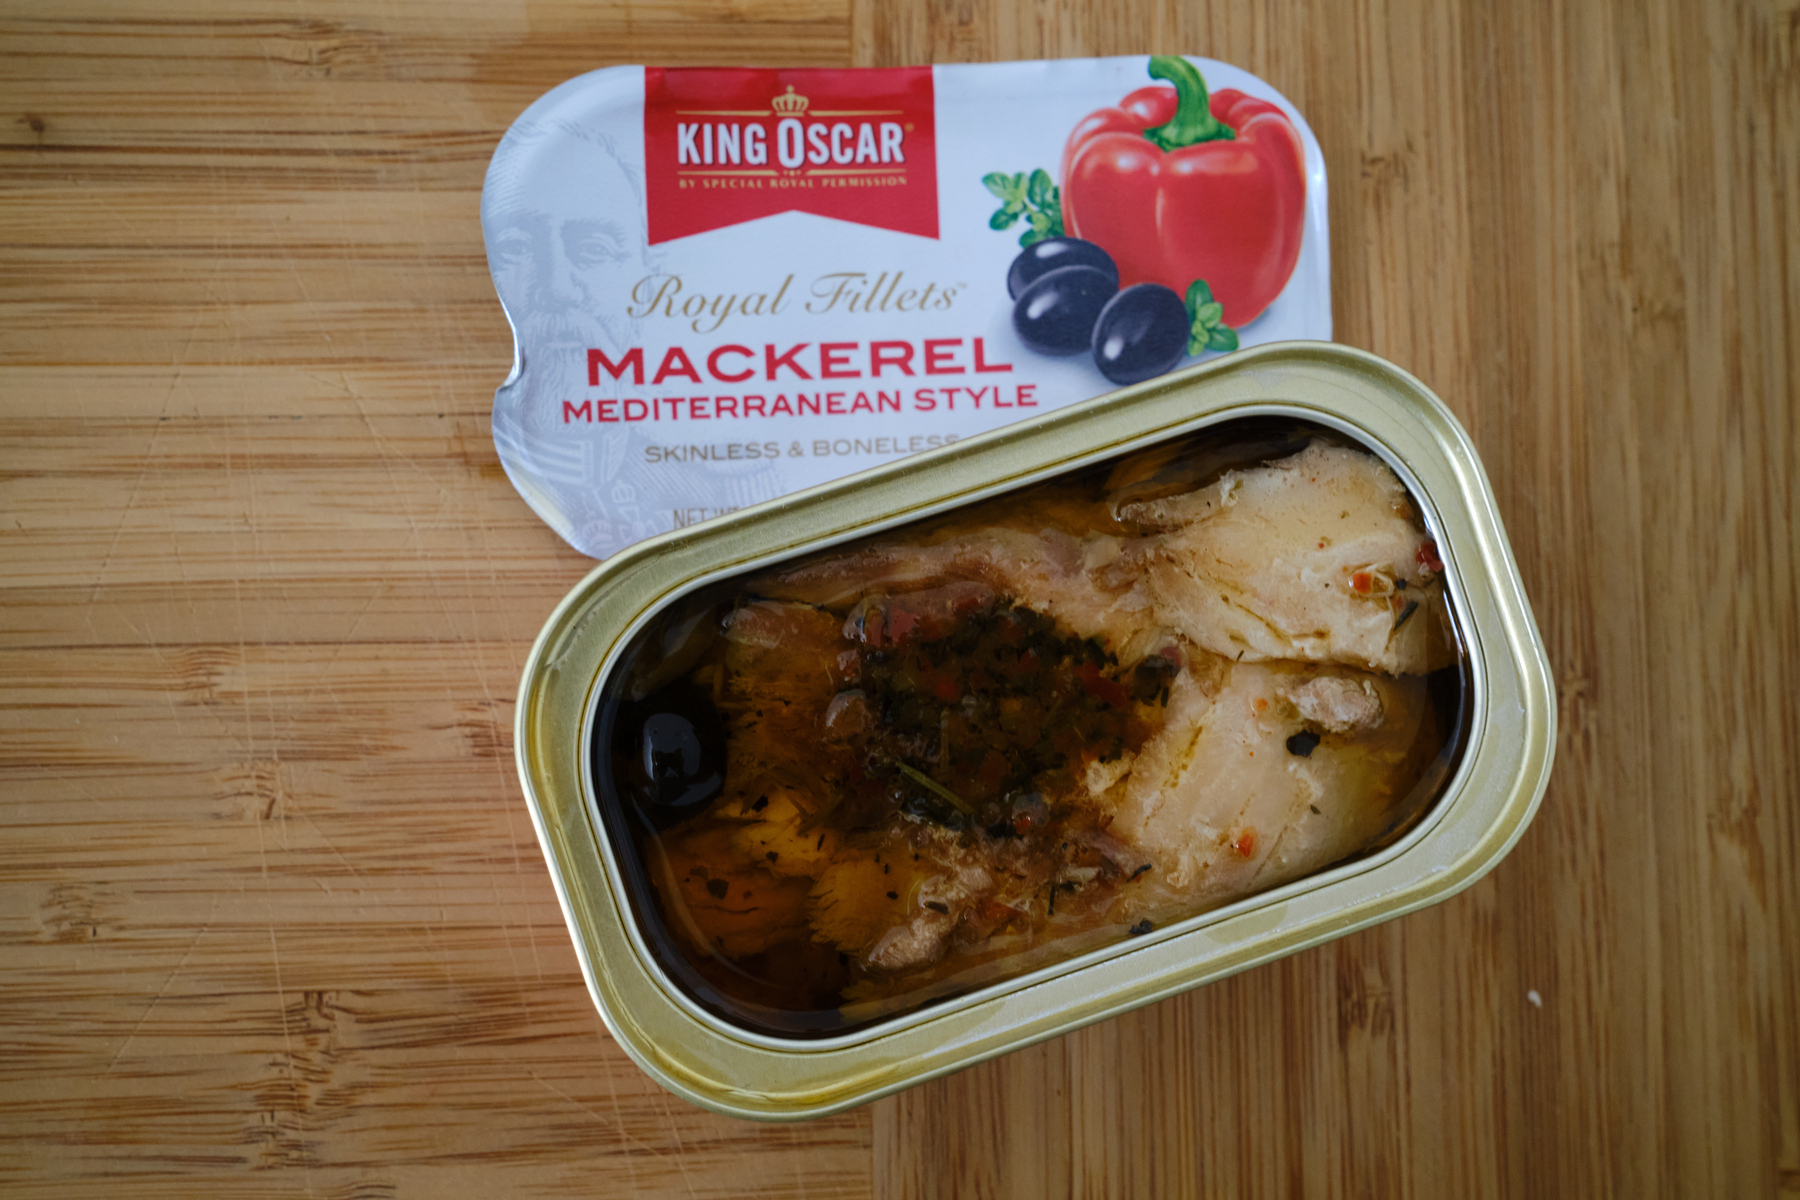 A top down look into a freshly opened can of King Oscar Mediterranean Style Mackerel filets. 